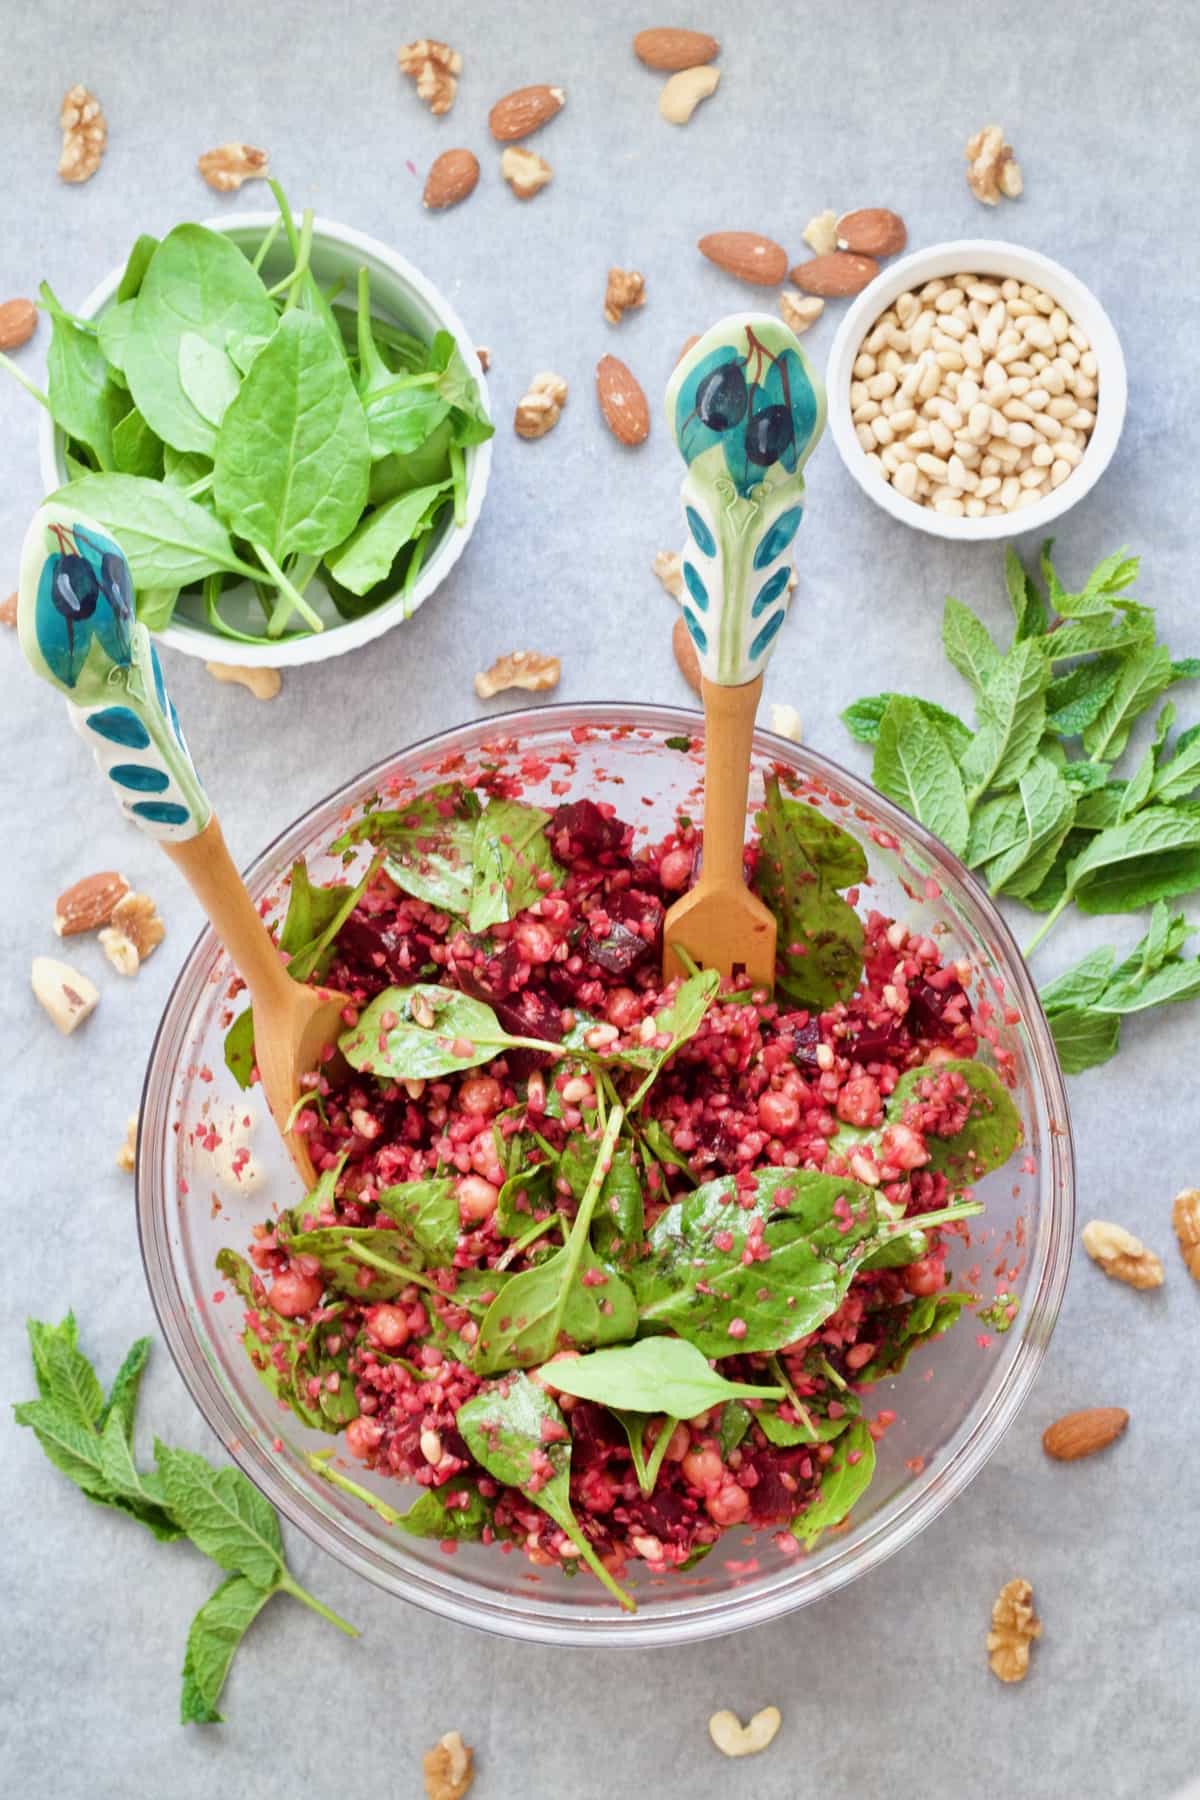 Buckwheat & beetroot salad with spinach and pine nuts in bowls.